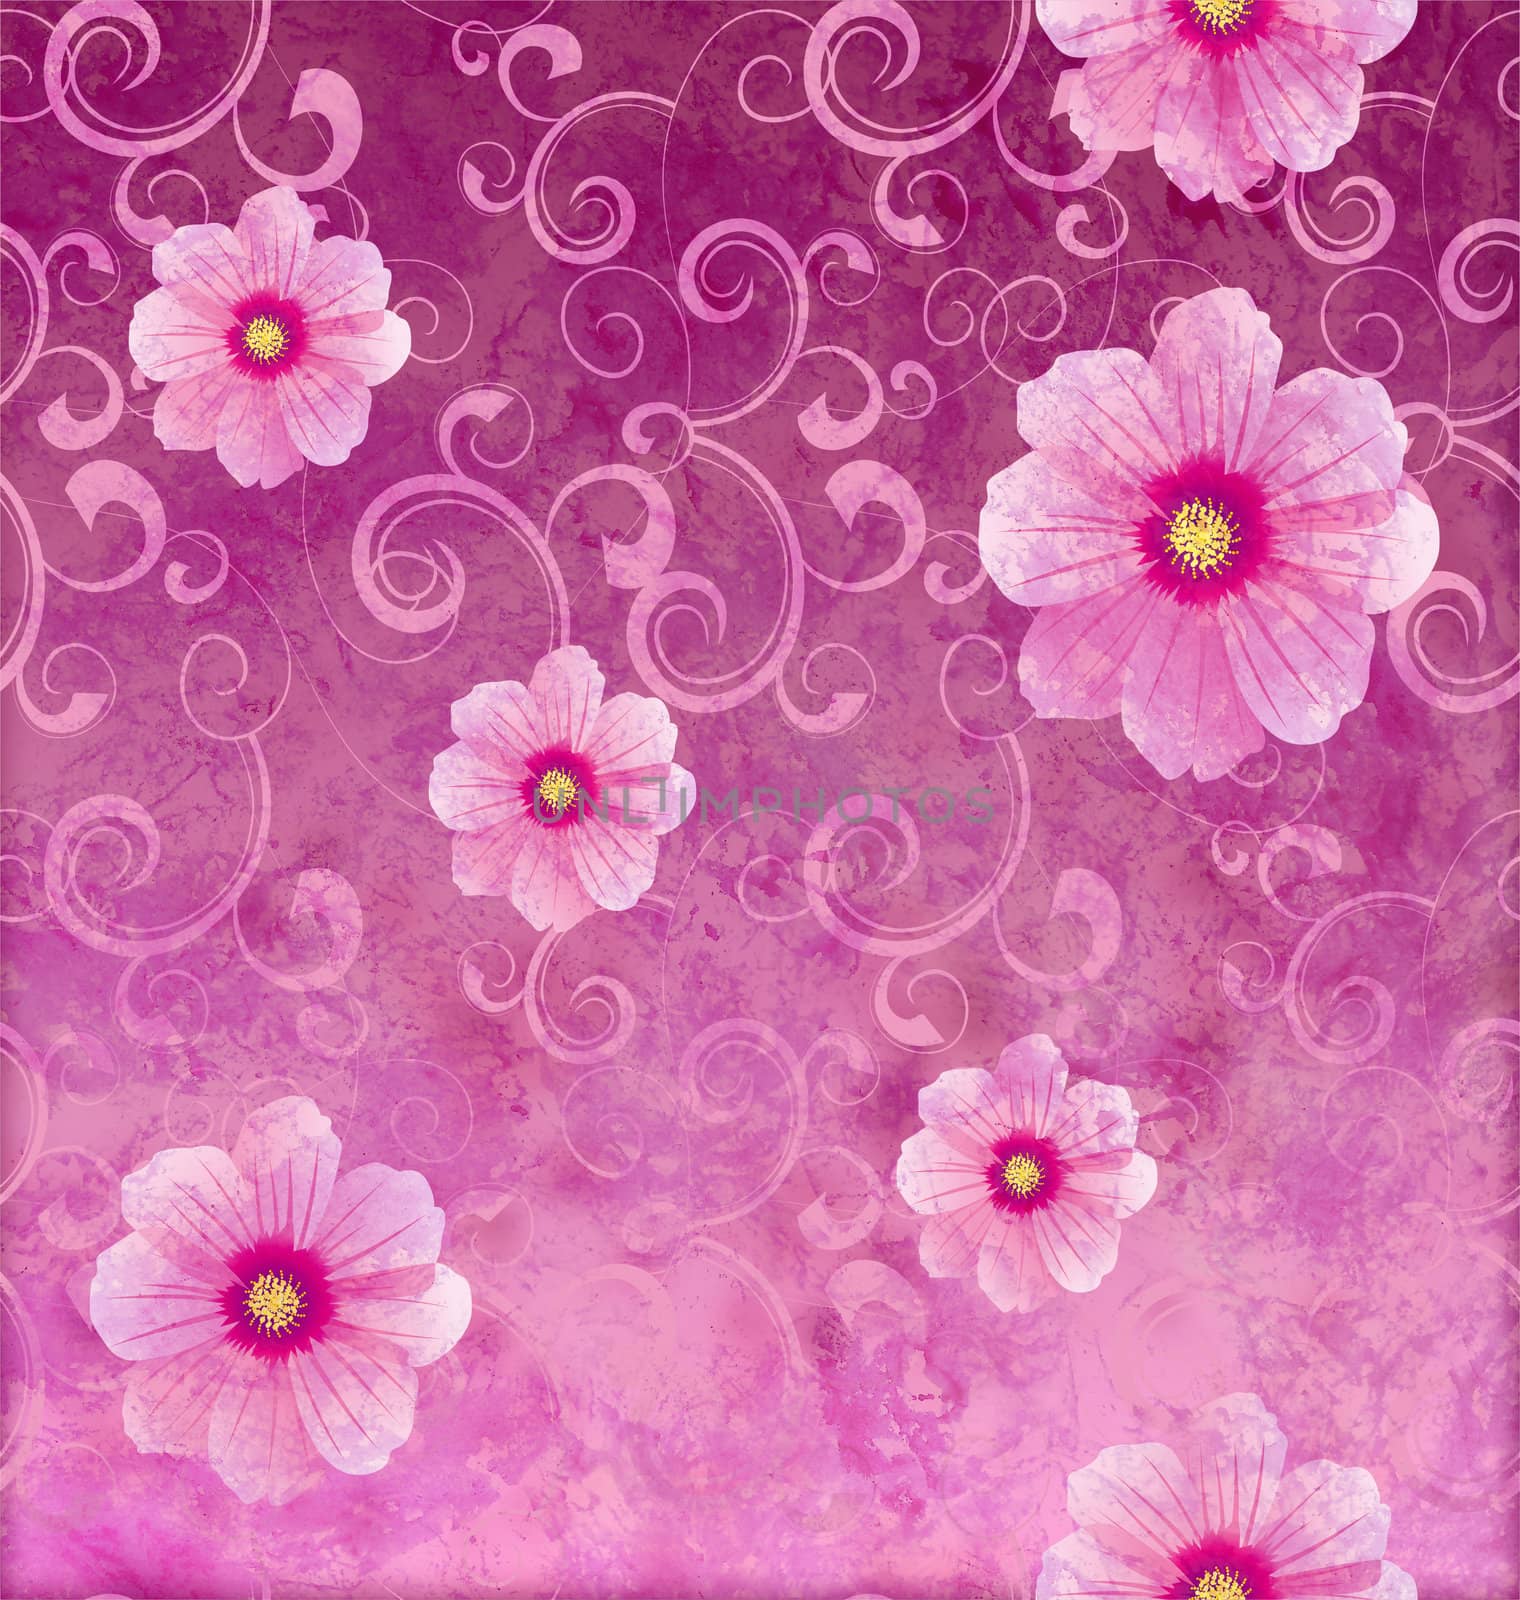 pink flowers romantic spring vintage background, love and cute